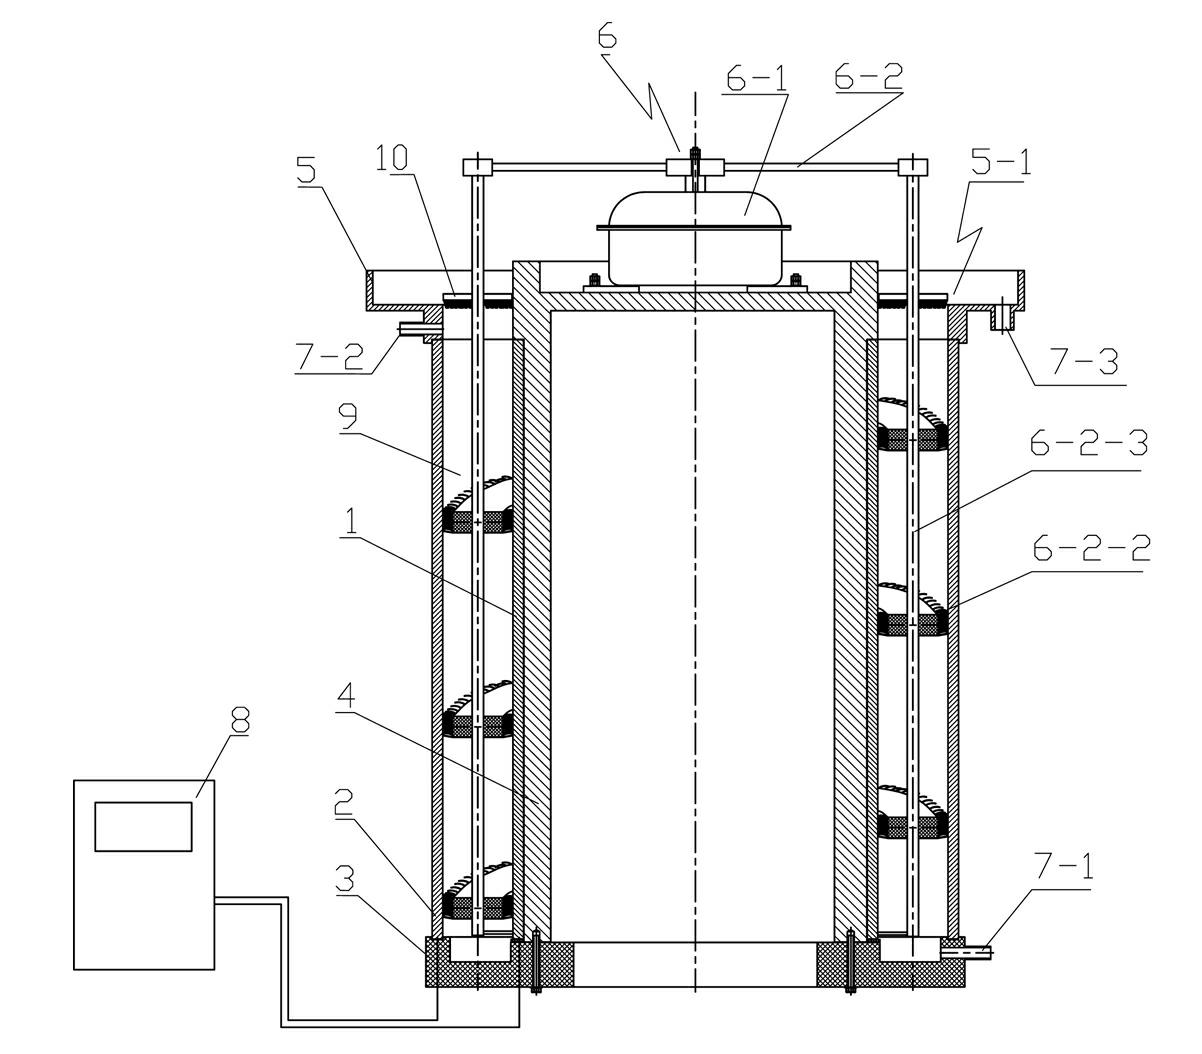 Wastewater electrochemical treatment device